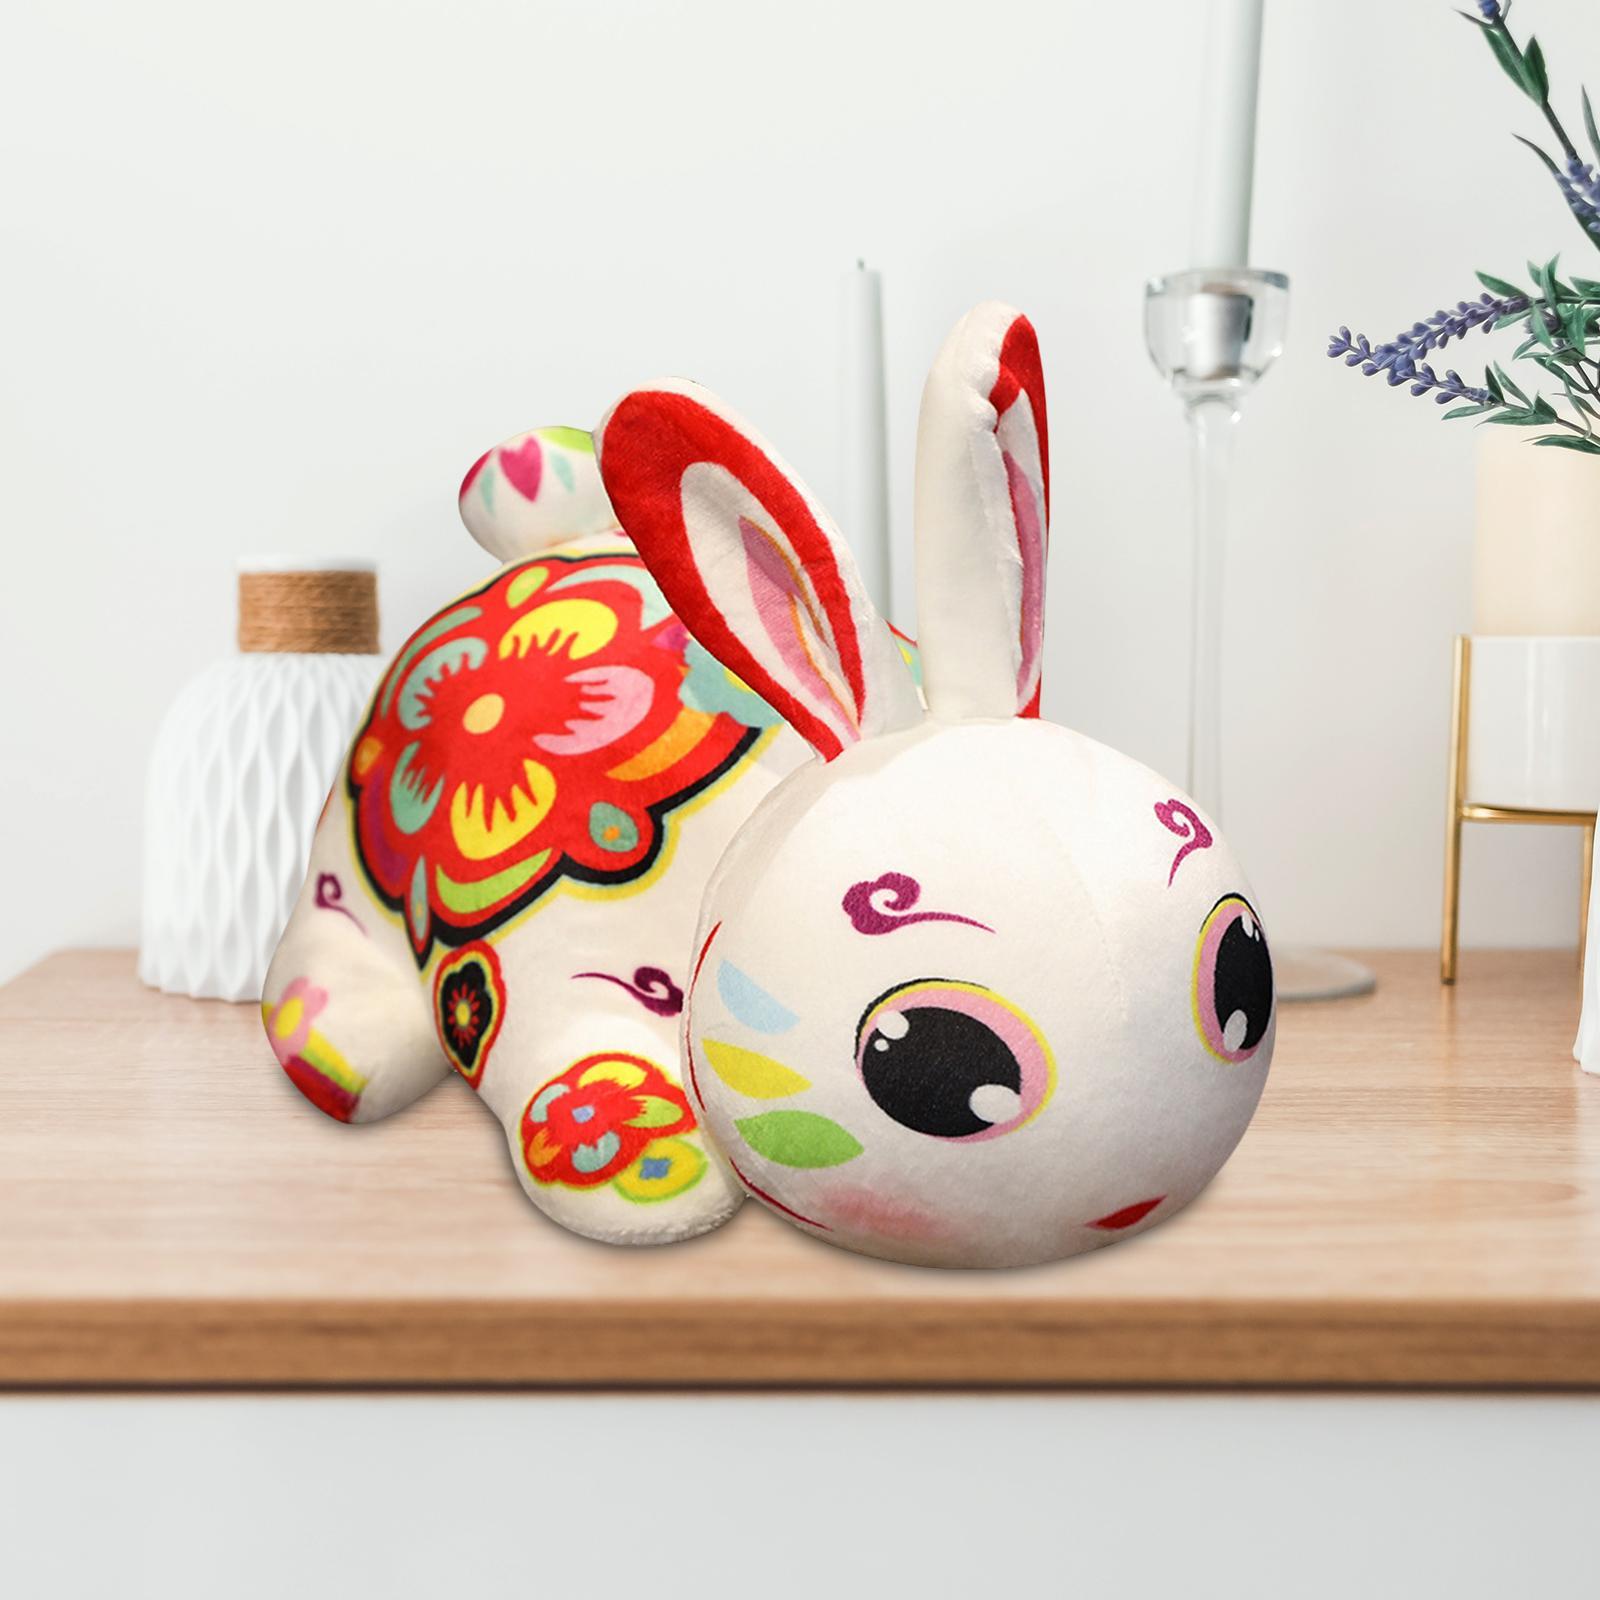 Rabbit Doll Collection Gift Festival Decor Rabbit Plush Toy for Office Gift Party